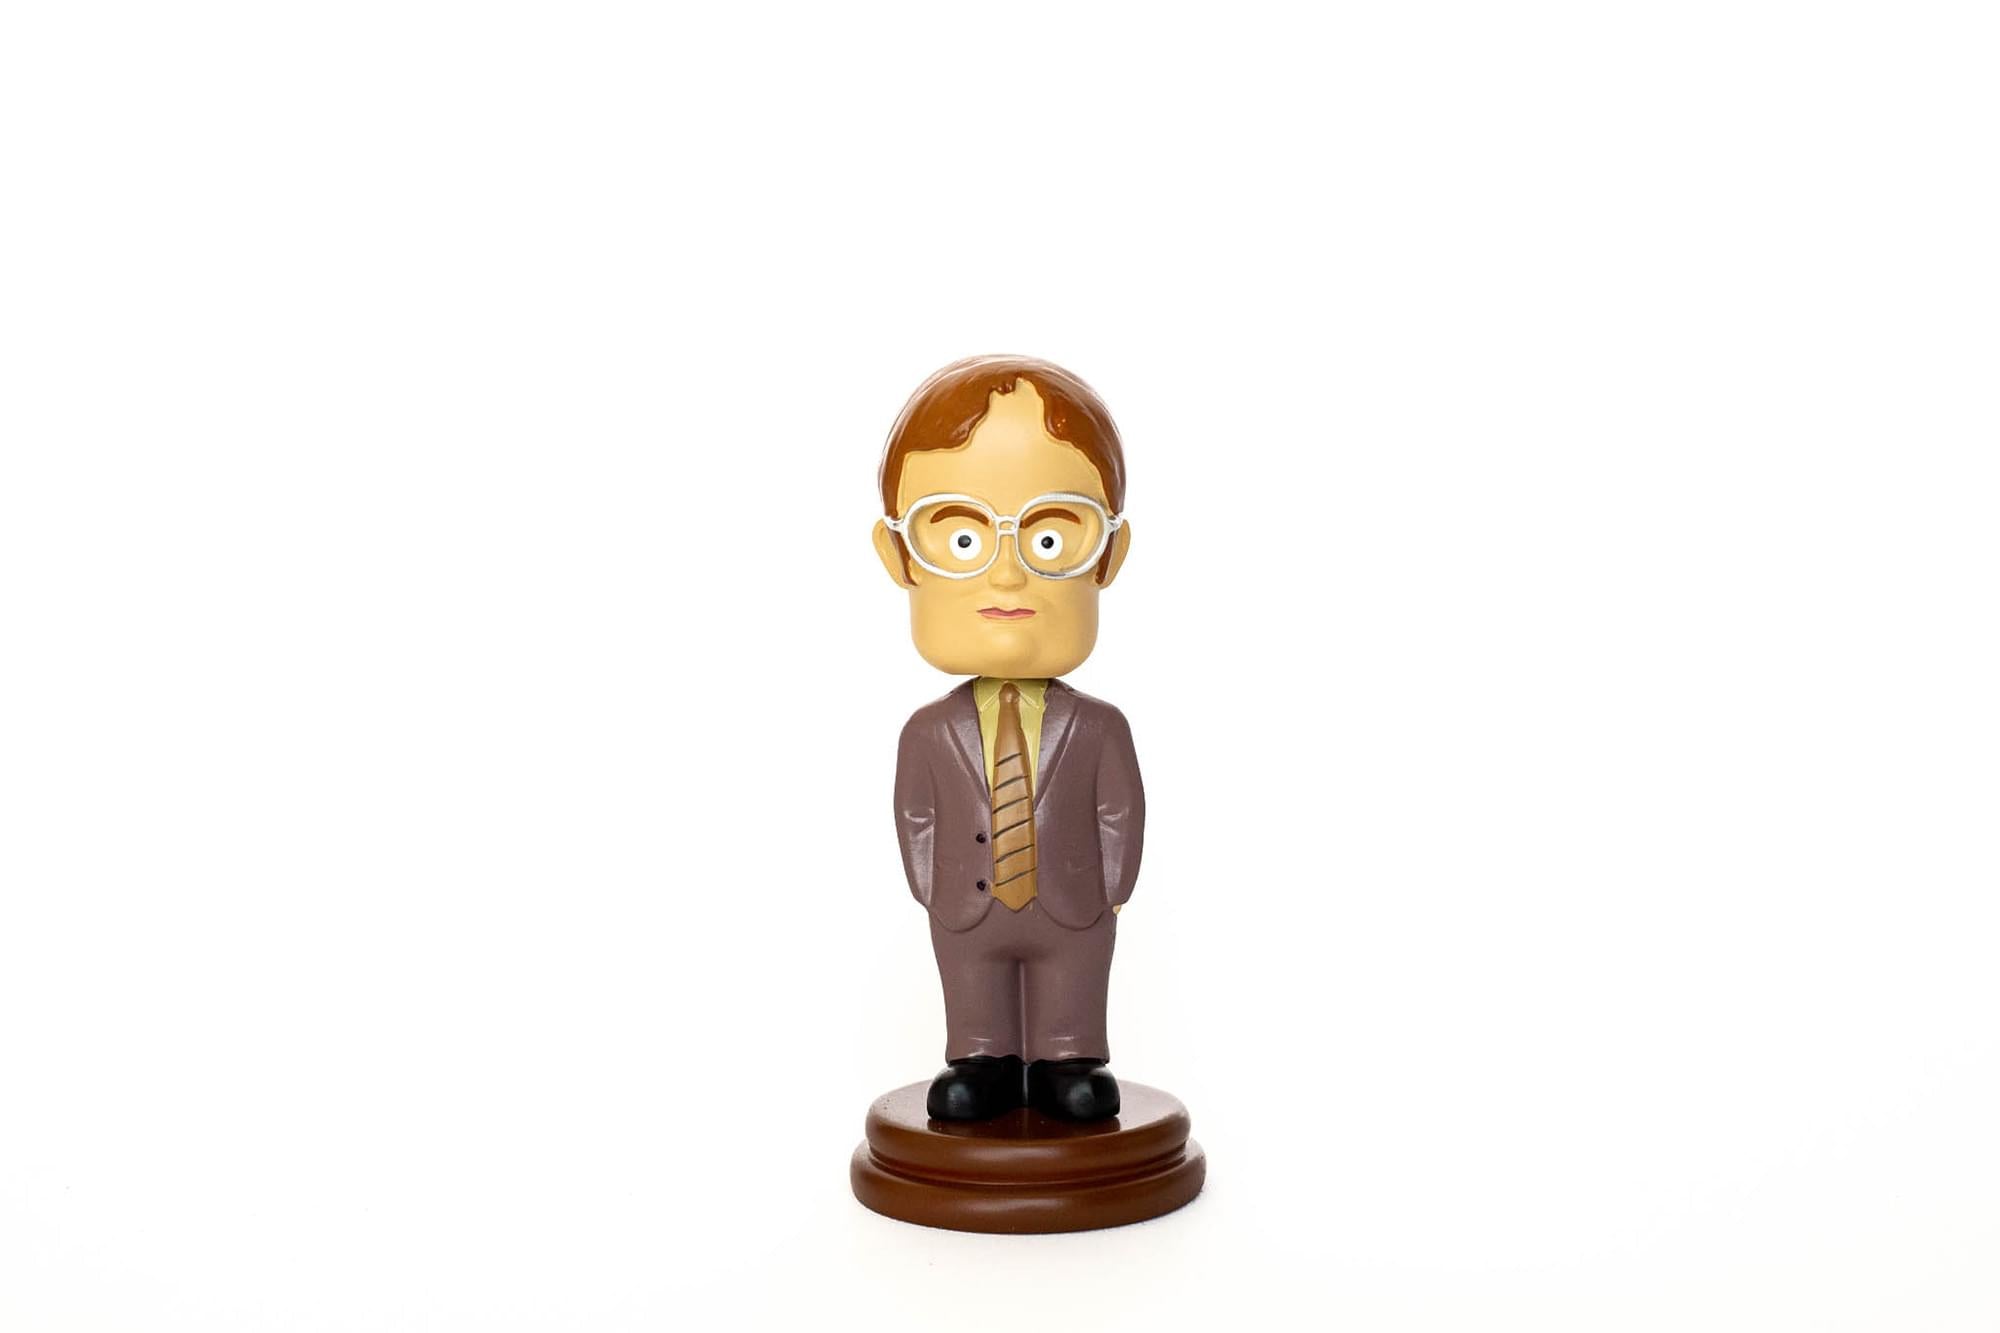 The Office Dwight Schrute Bobblehead Collectible Figure , Stands 5.5 Inches Tall